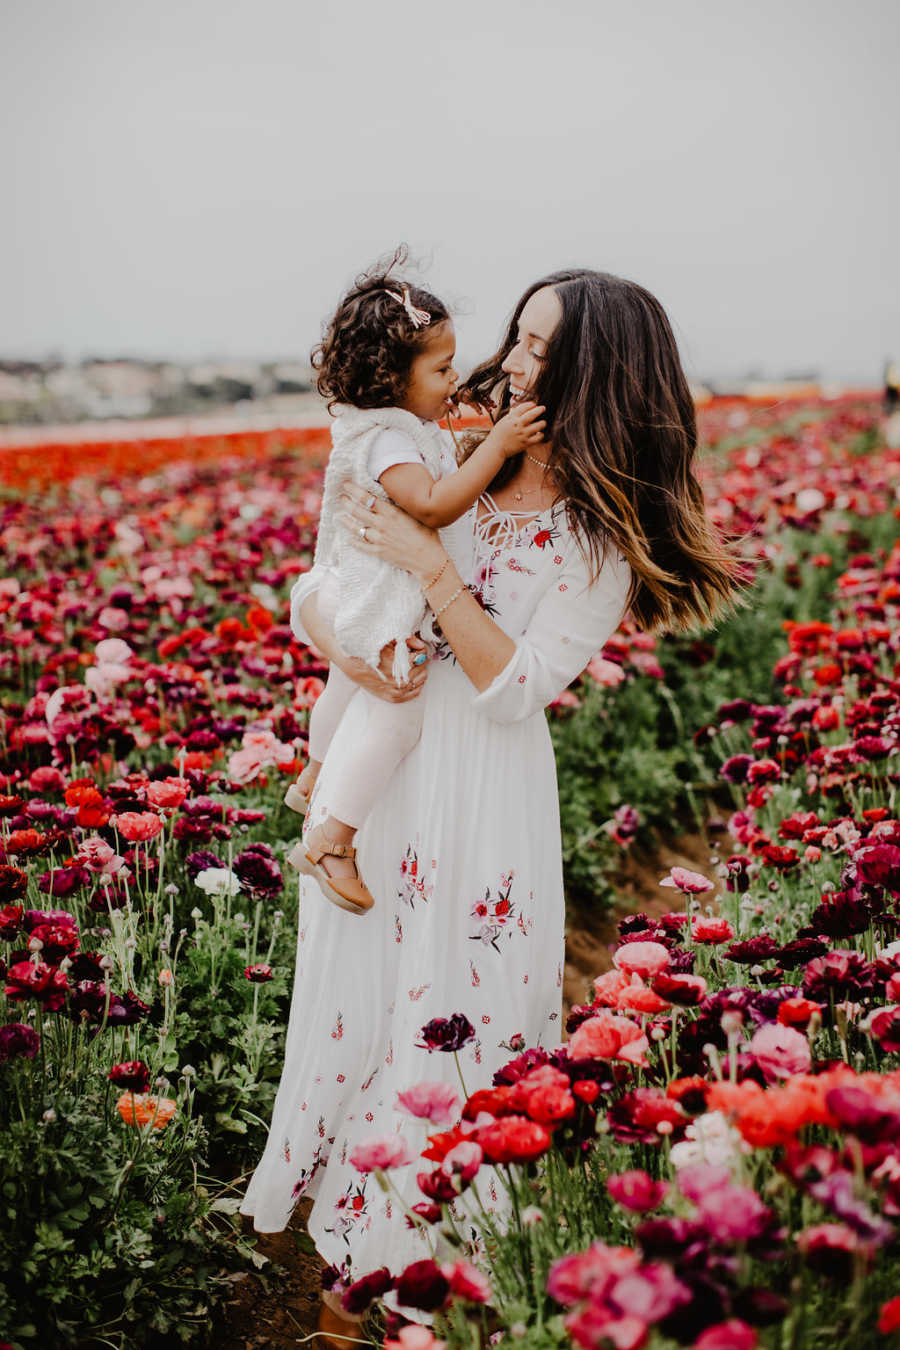 Mother stands in field of pink and red flowers holding adopted daughter